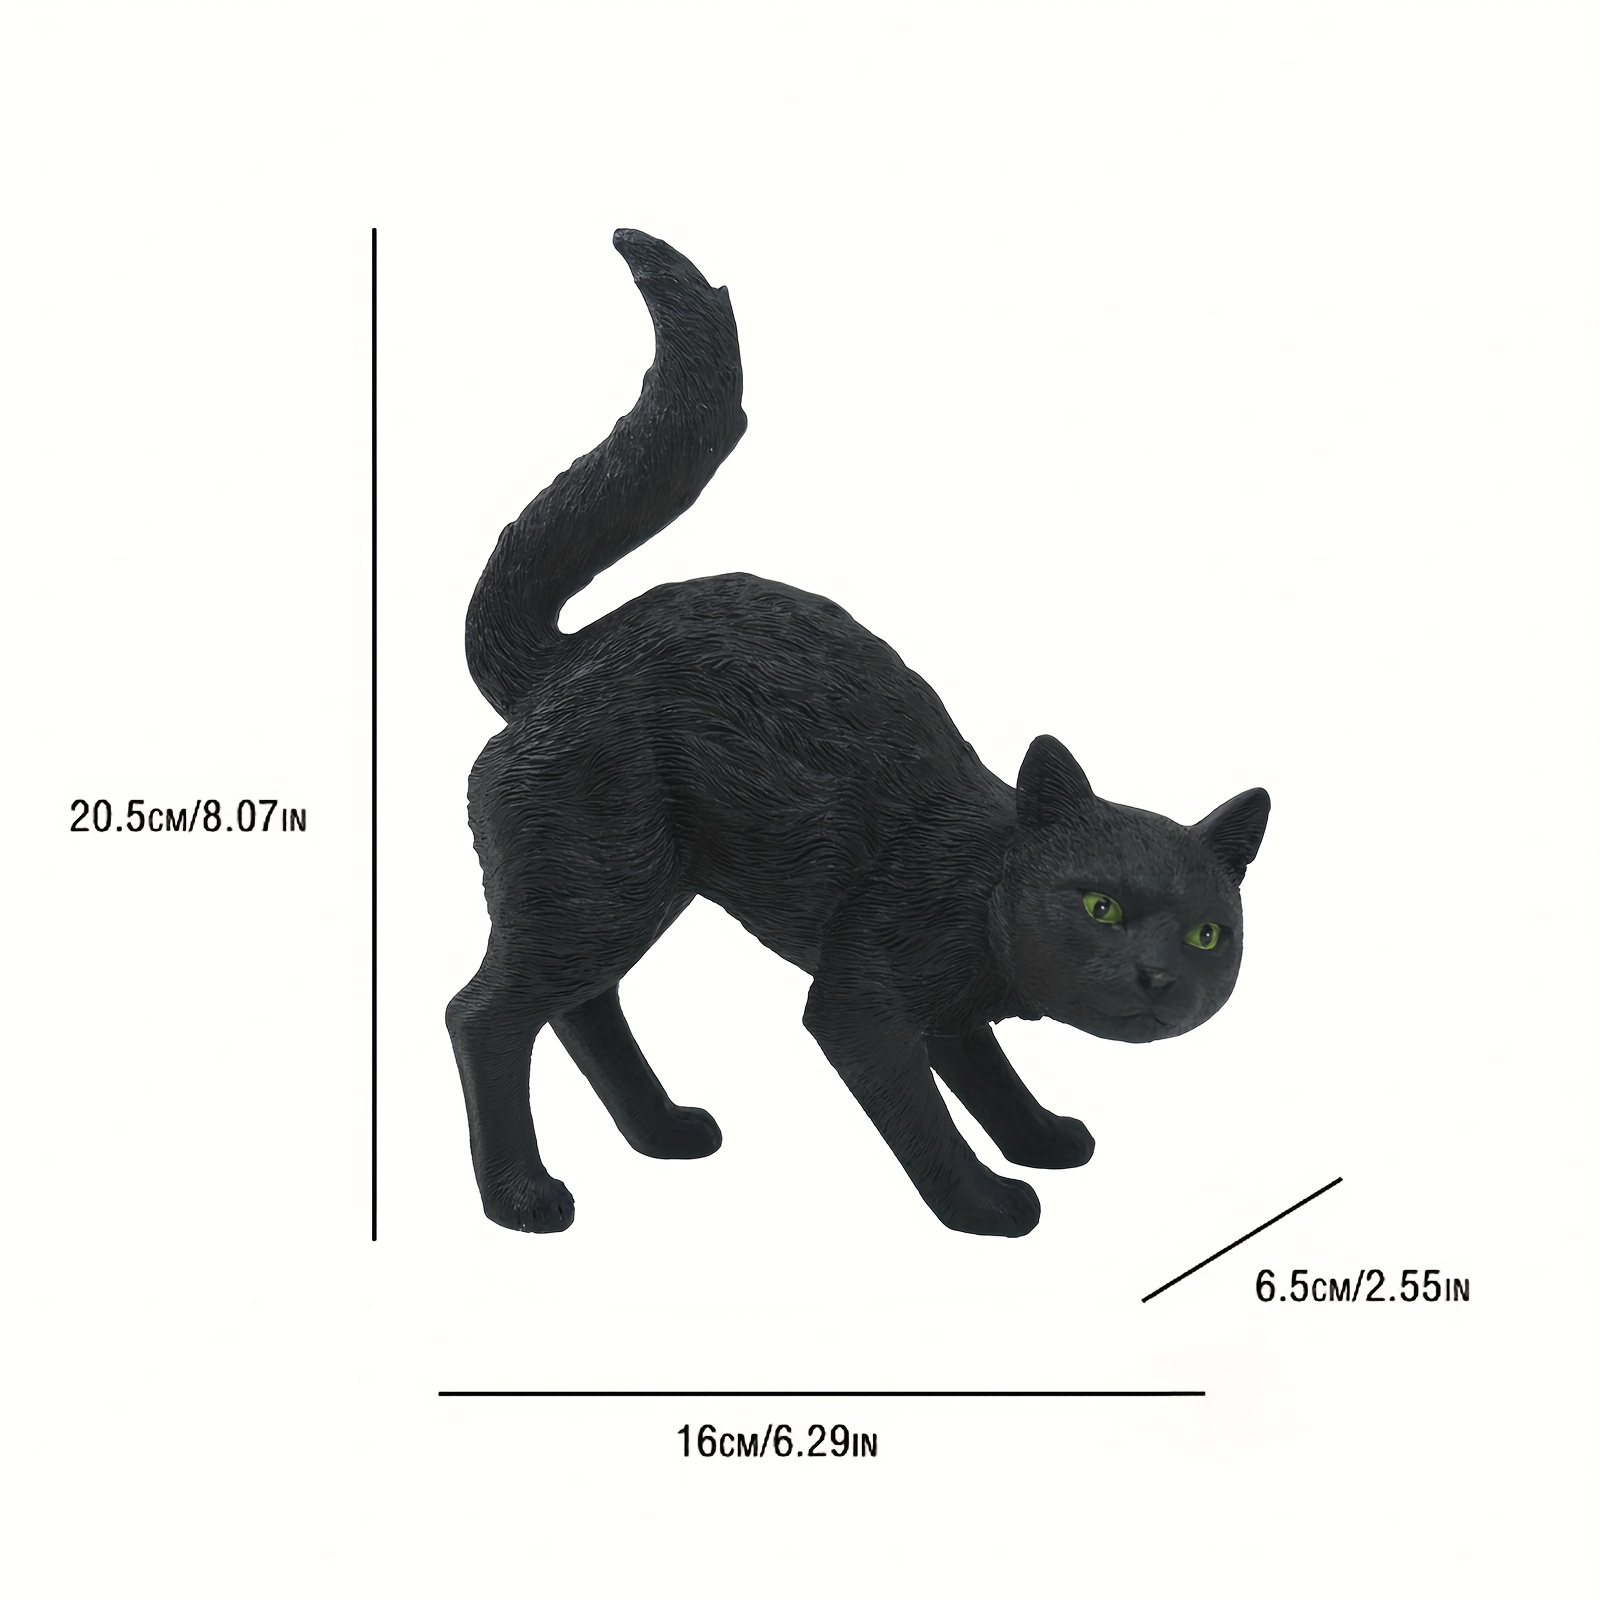 Japan Simulated Animal Black Cat Resin Charms for Jewelry Making